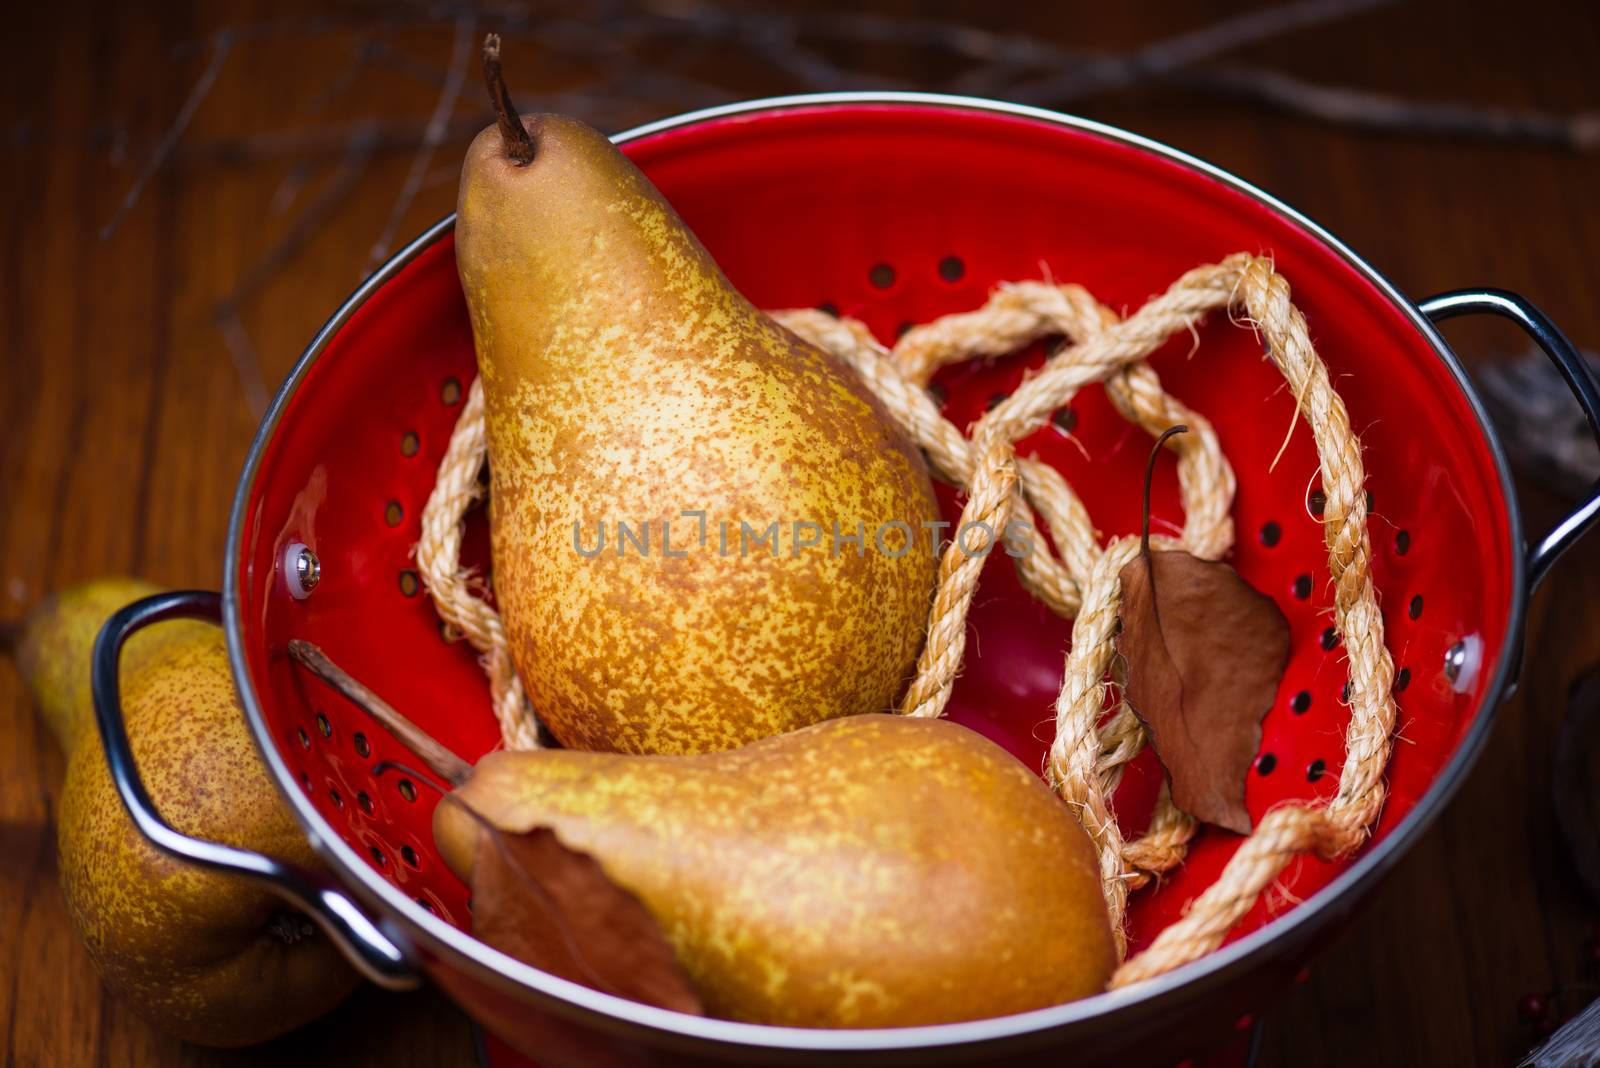 Two pears on a red colander with brown color wood background and ropes.